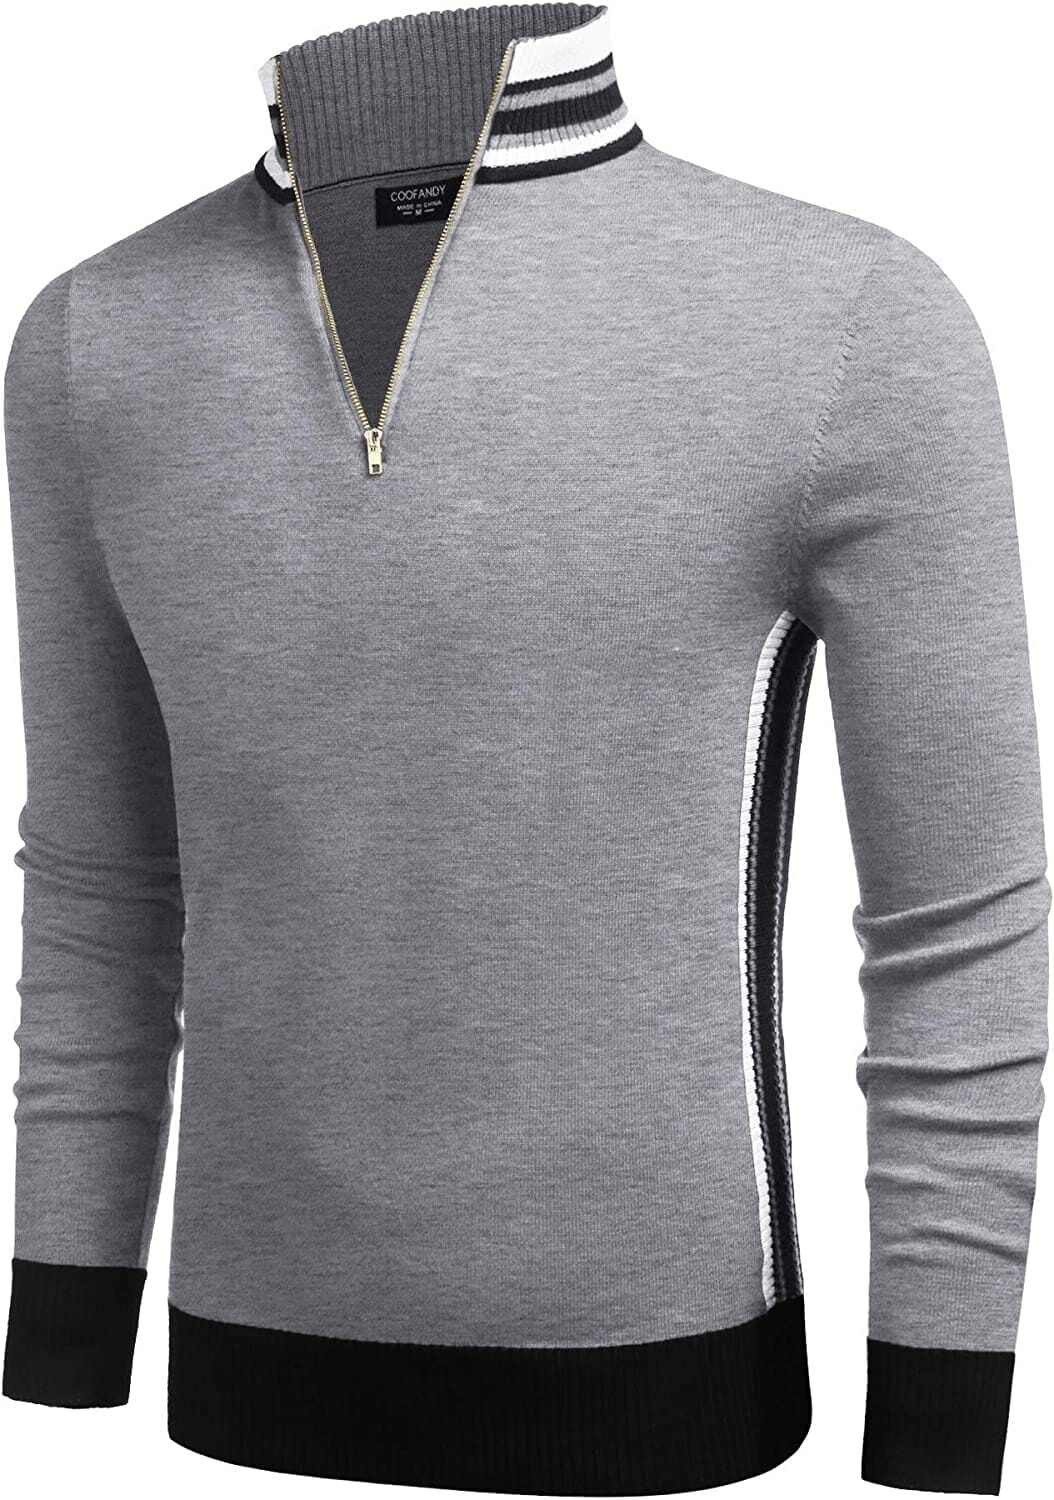 Striped Collar Pullover Sweater (US Only) Sweaters COOFANDY Store Grey S 